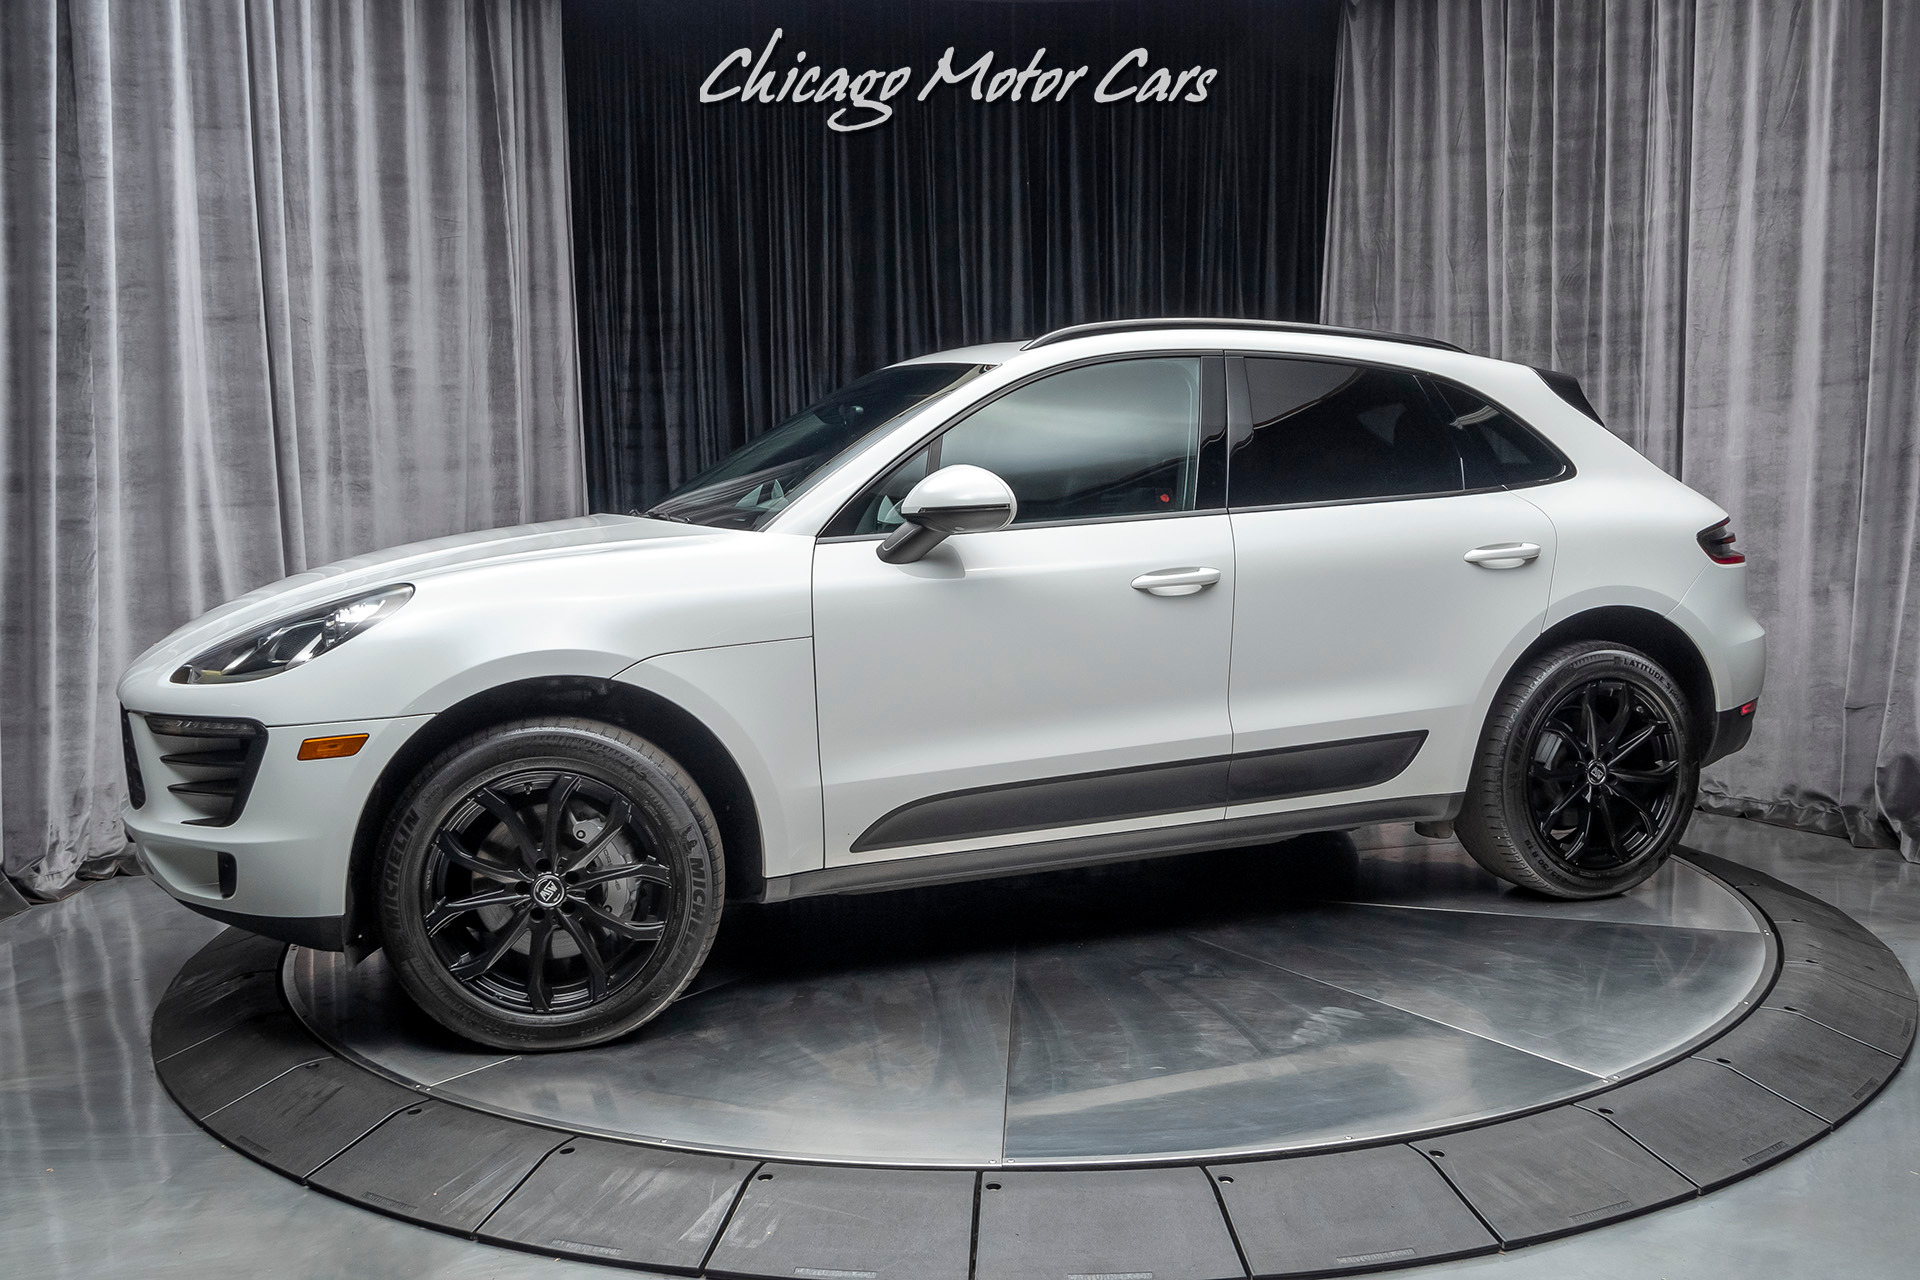 Used-2015-Porsche-Macan-S-PANO-ROOF-BOSE-SOUND-SUPER-CLEAN